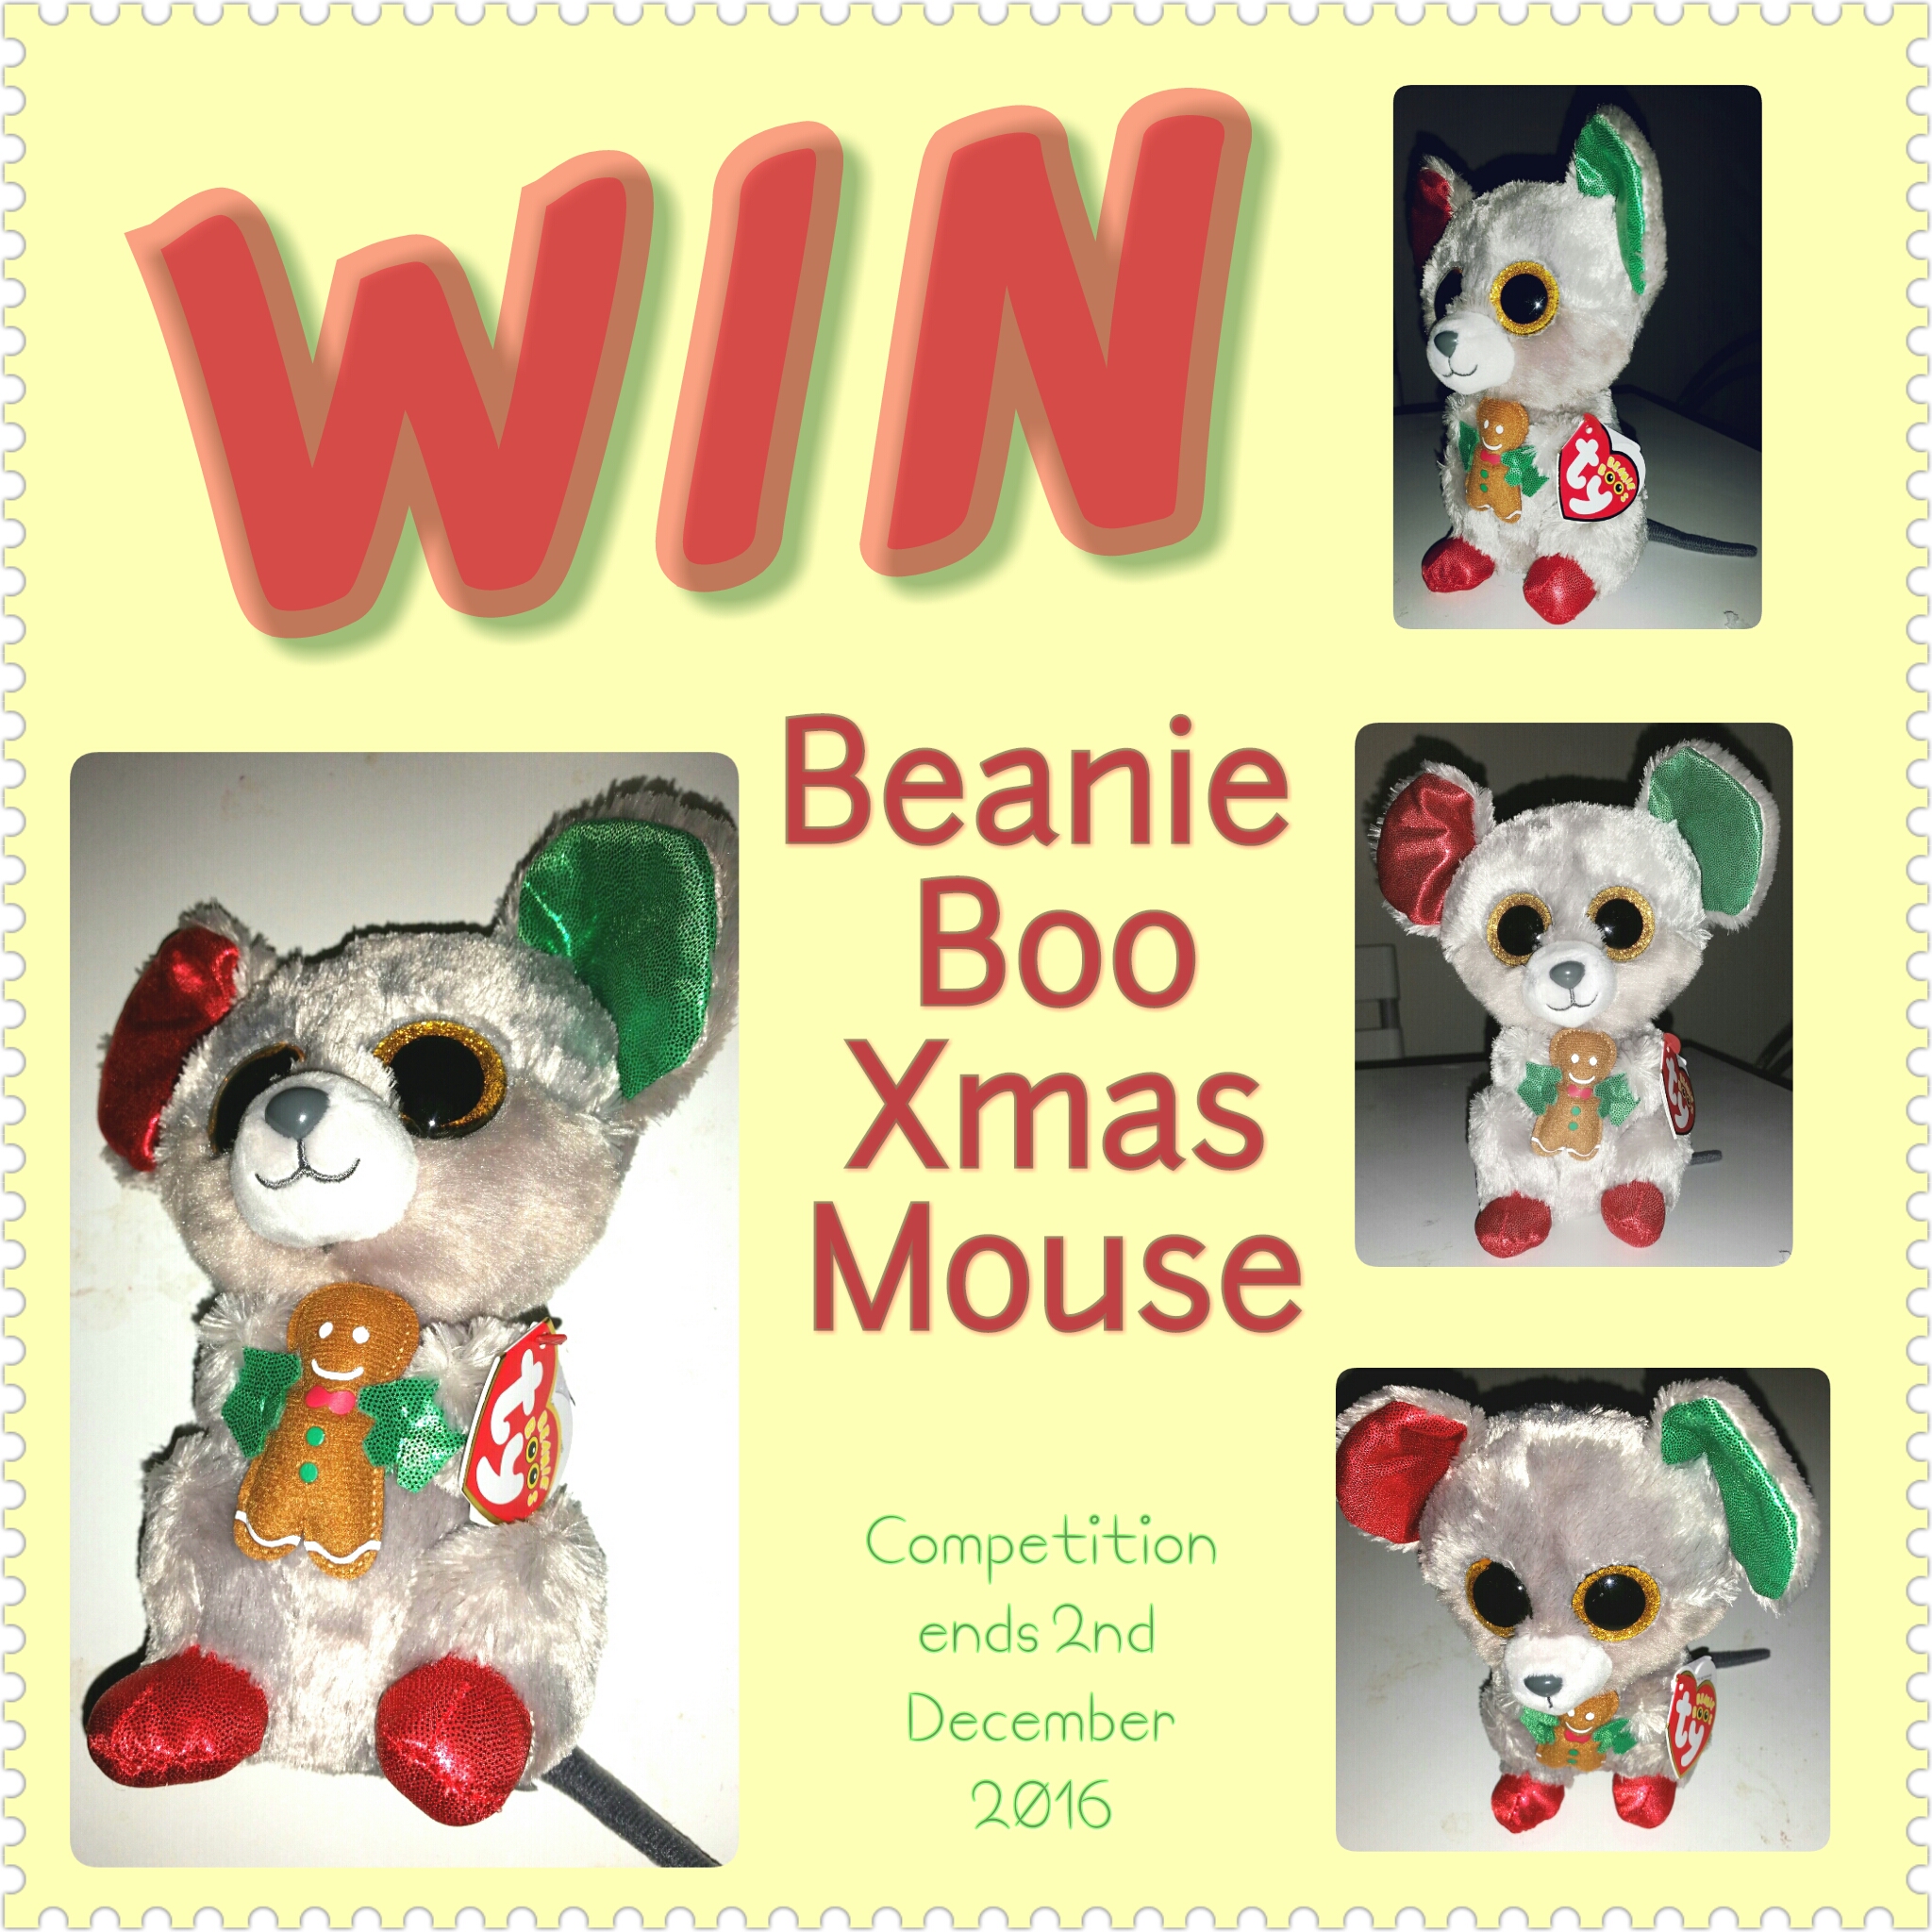 Competition, giveaway, prize draw, win, Beanie Boos, Mac the Christmas Mouse